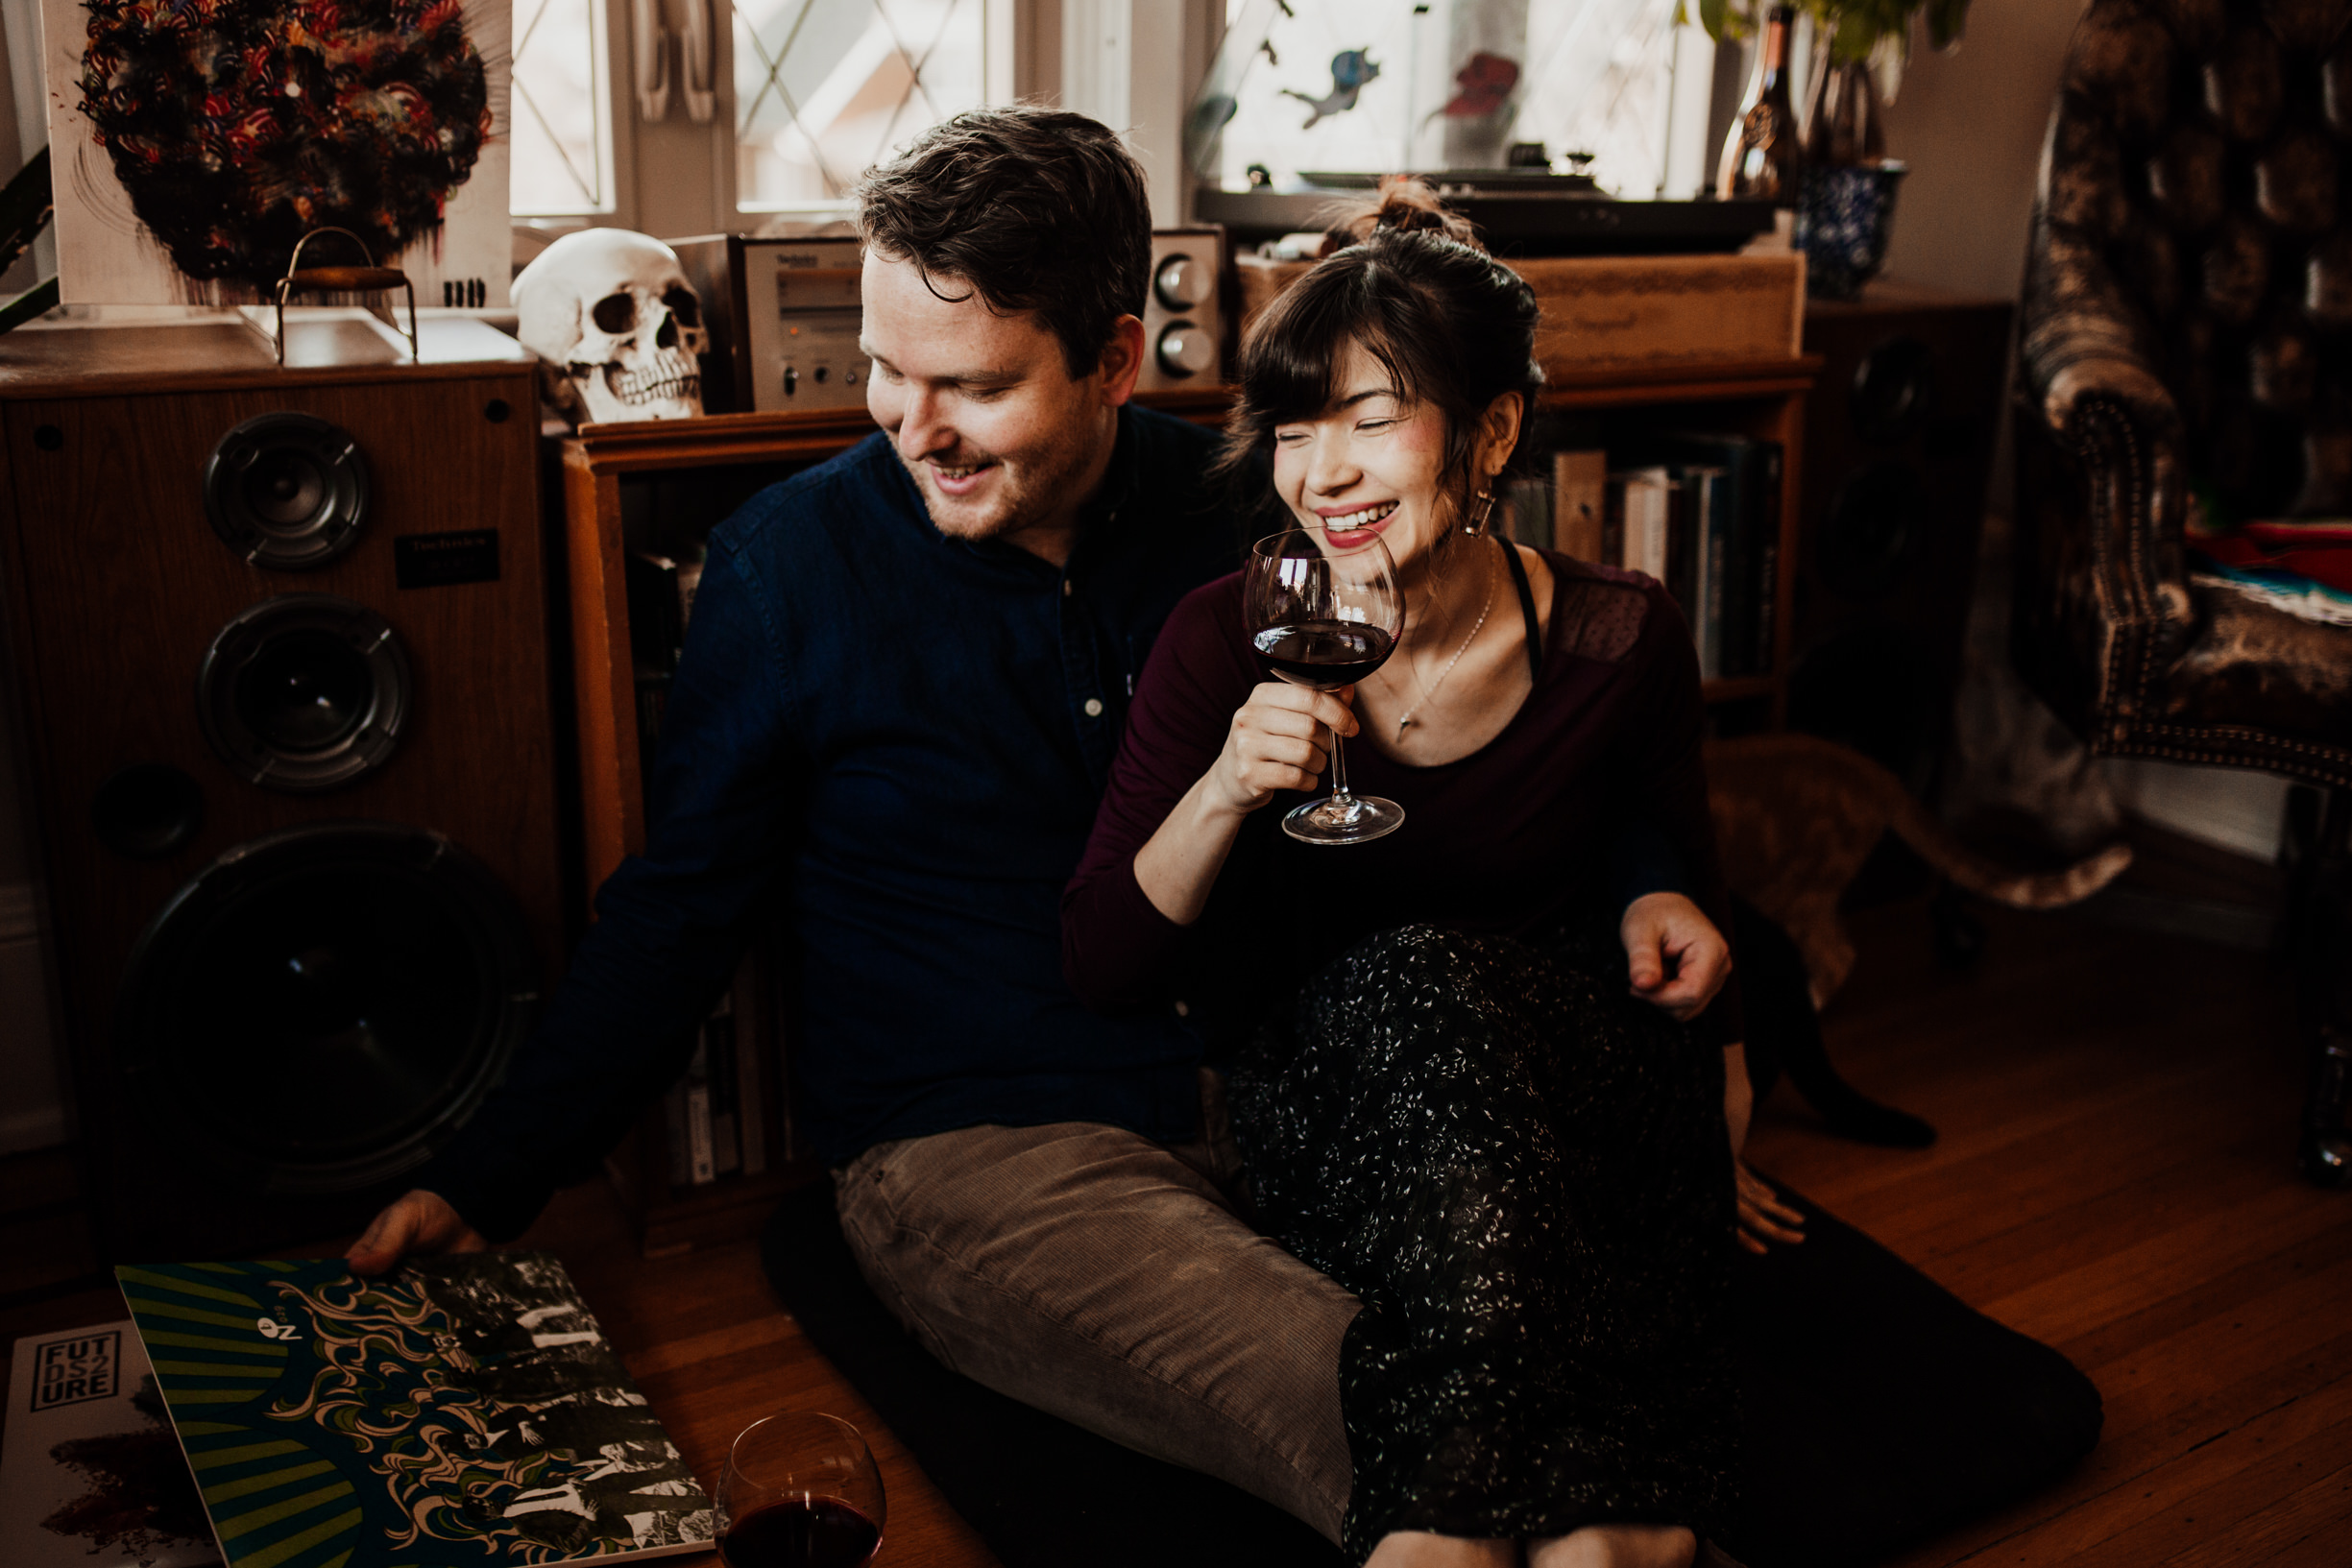 louisville-engagement-photographer-record-store-in-home-session-crystal-ludwick-photo (20 of 53).jpg